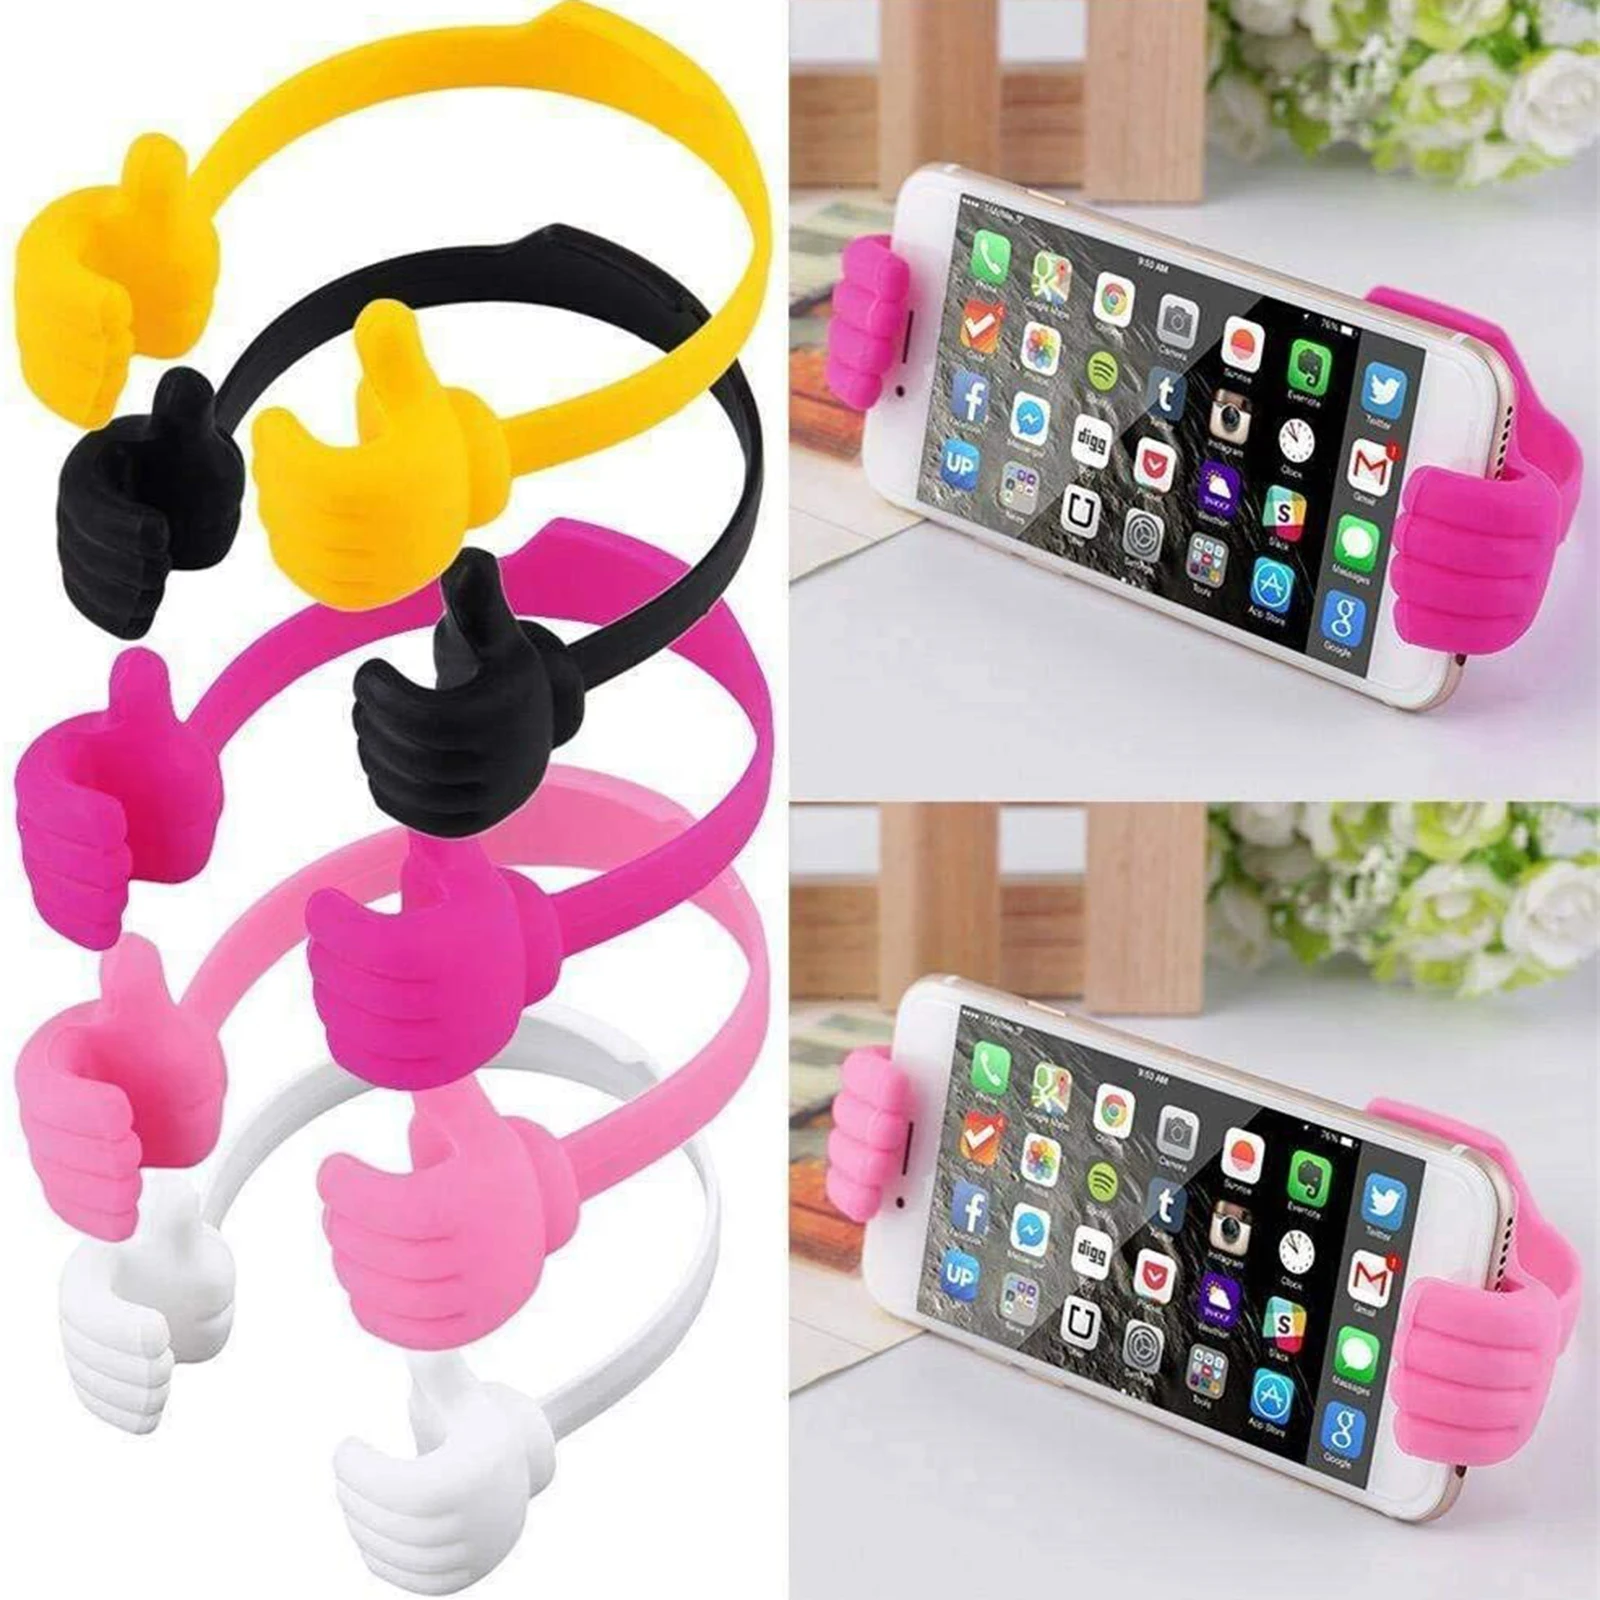 

Thumbs Up Mobile Cell Phone Holder Movie Watching Lazy Bed Desktop Mount Stand Thumbs Up Mobile Cell Phone Holder fun convenient